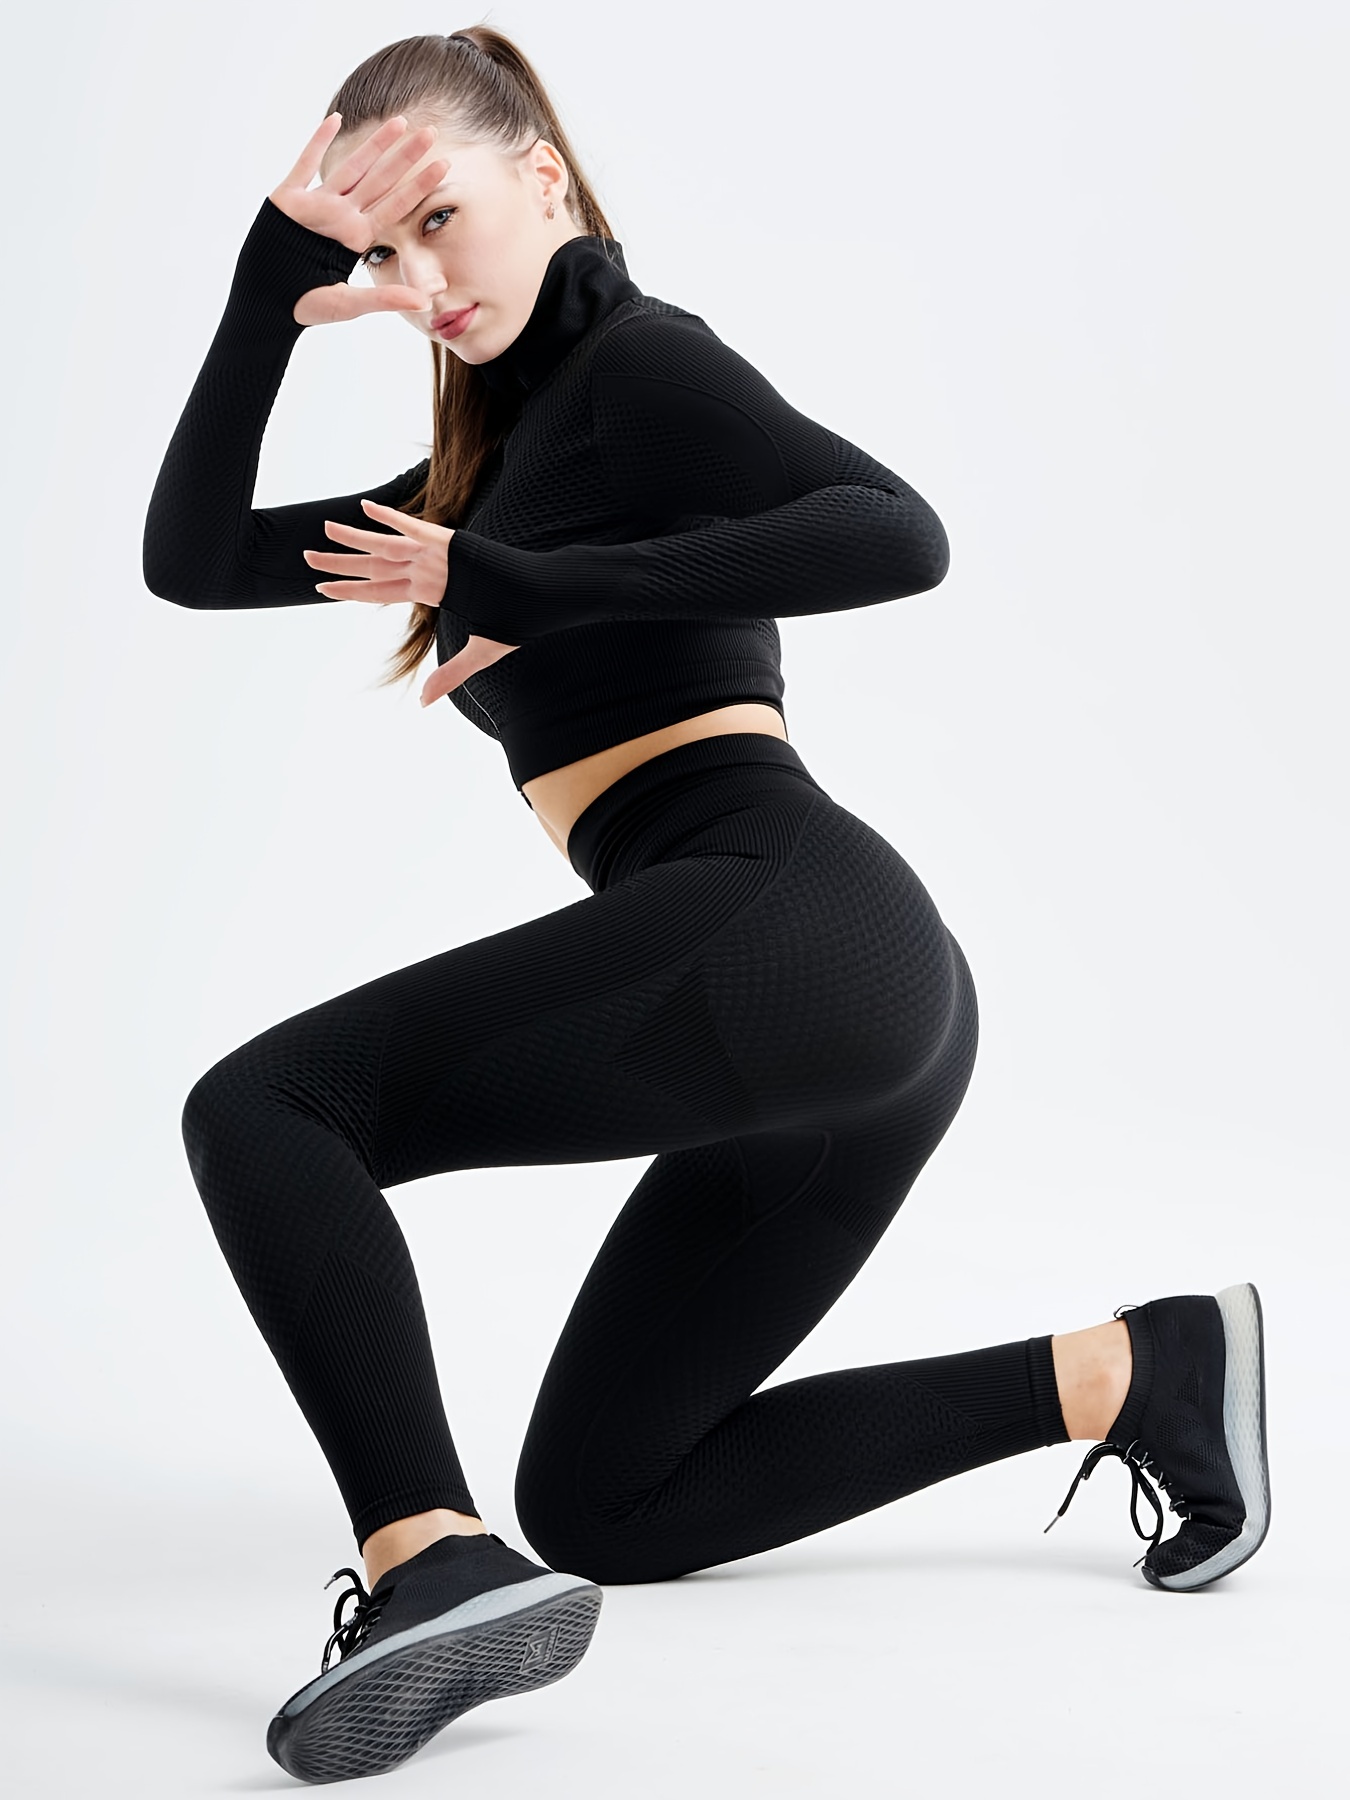 Women's knitted leggings  4F: Sportswear and shoes